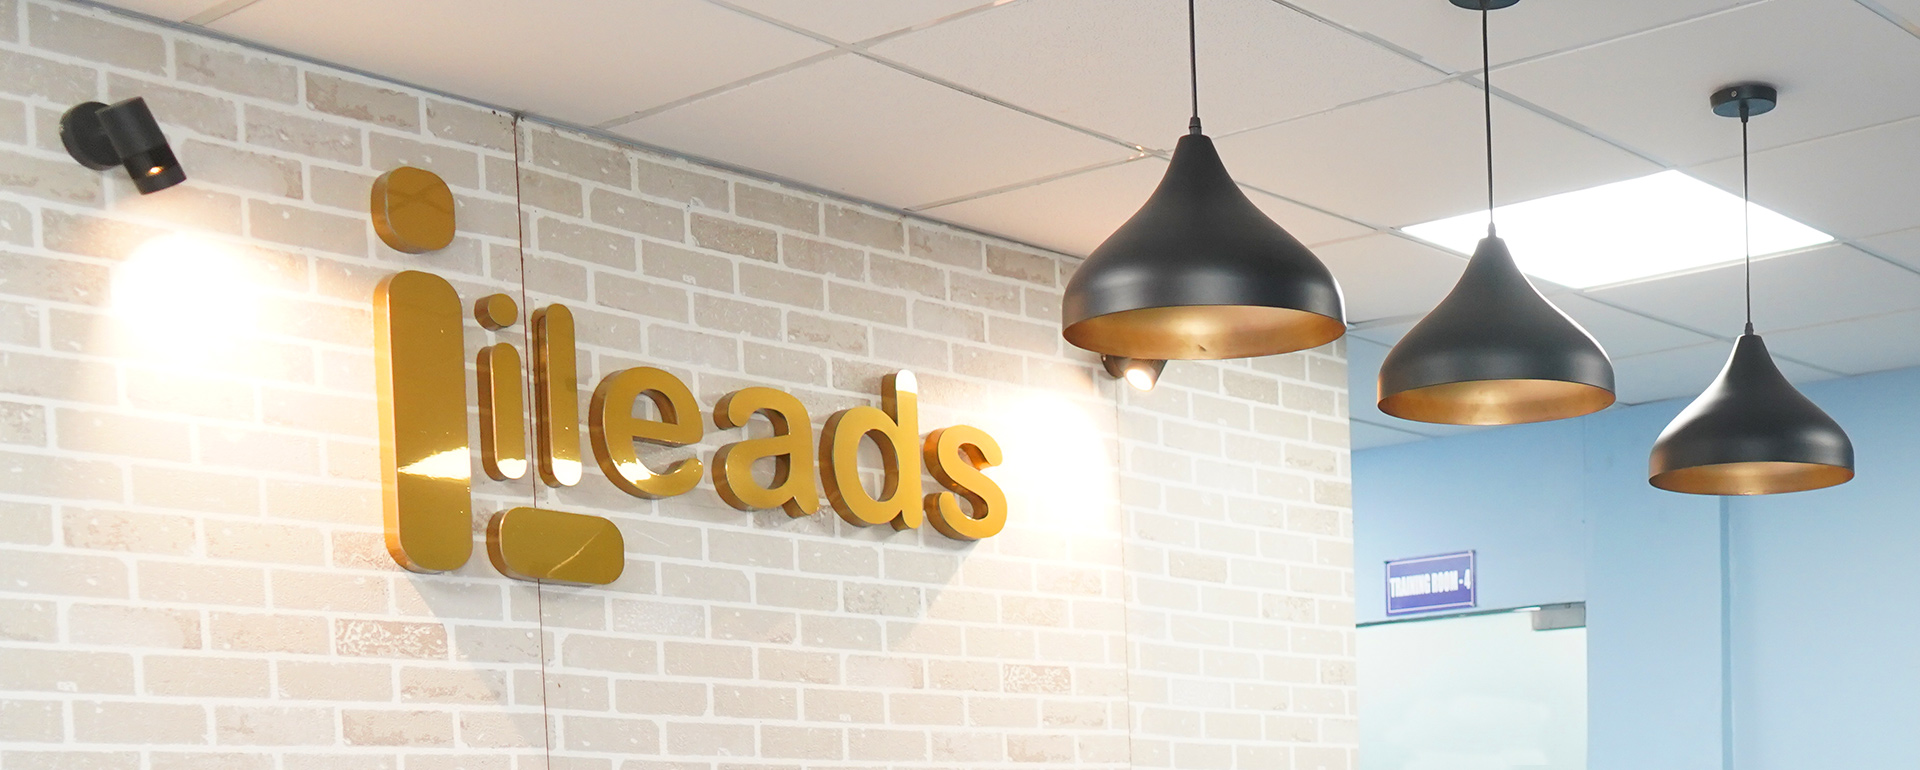 ILeads means Quality